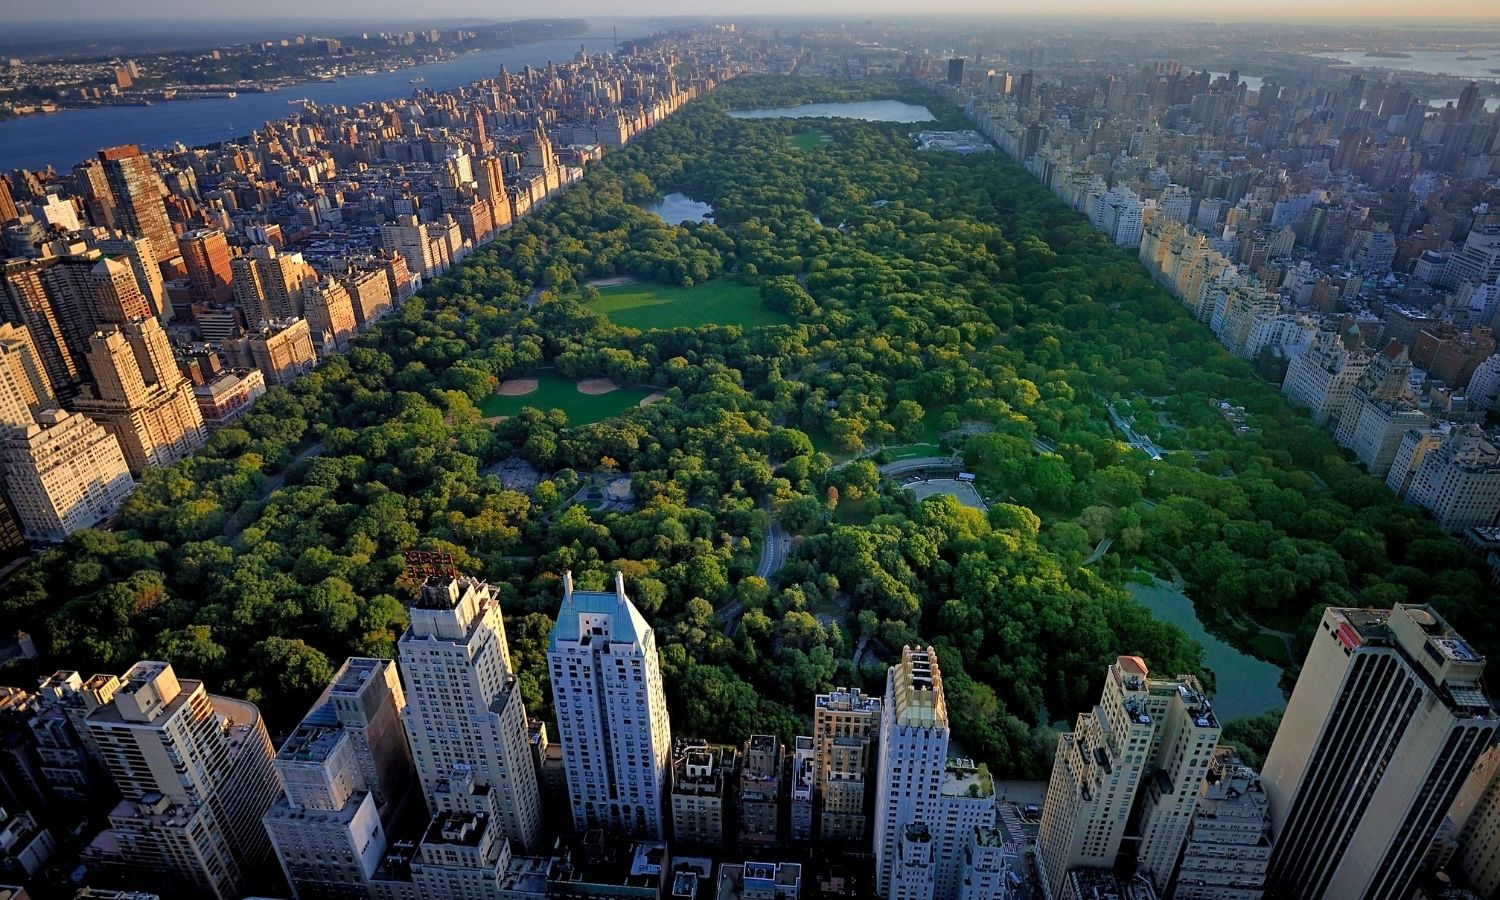 OTD in 1984: Central Park designated a section of its grounds as "Strawberry Fields" to commemorate John Lennon